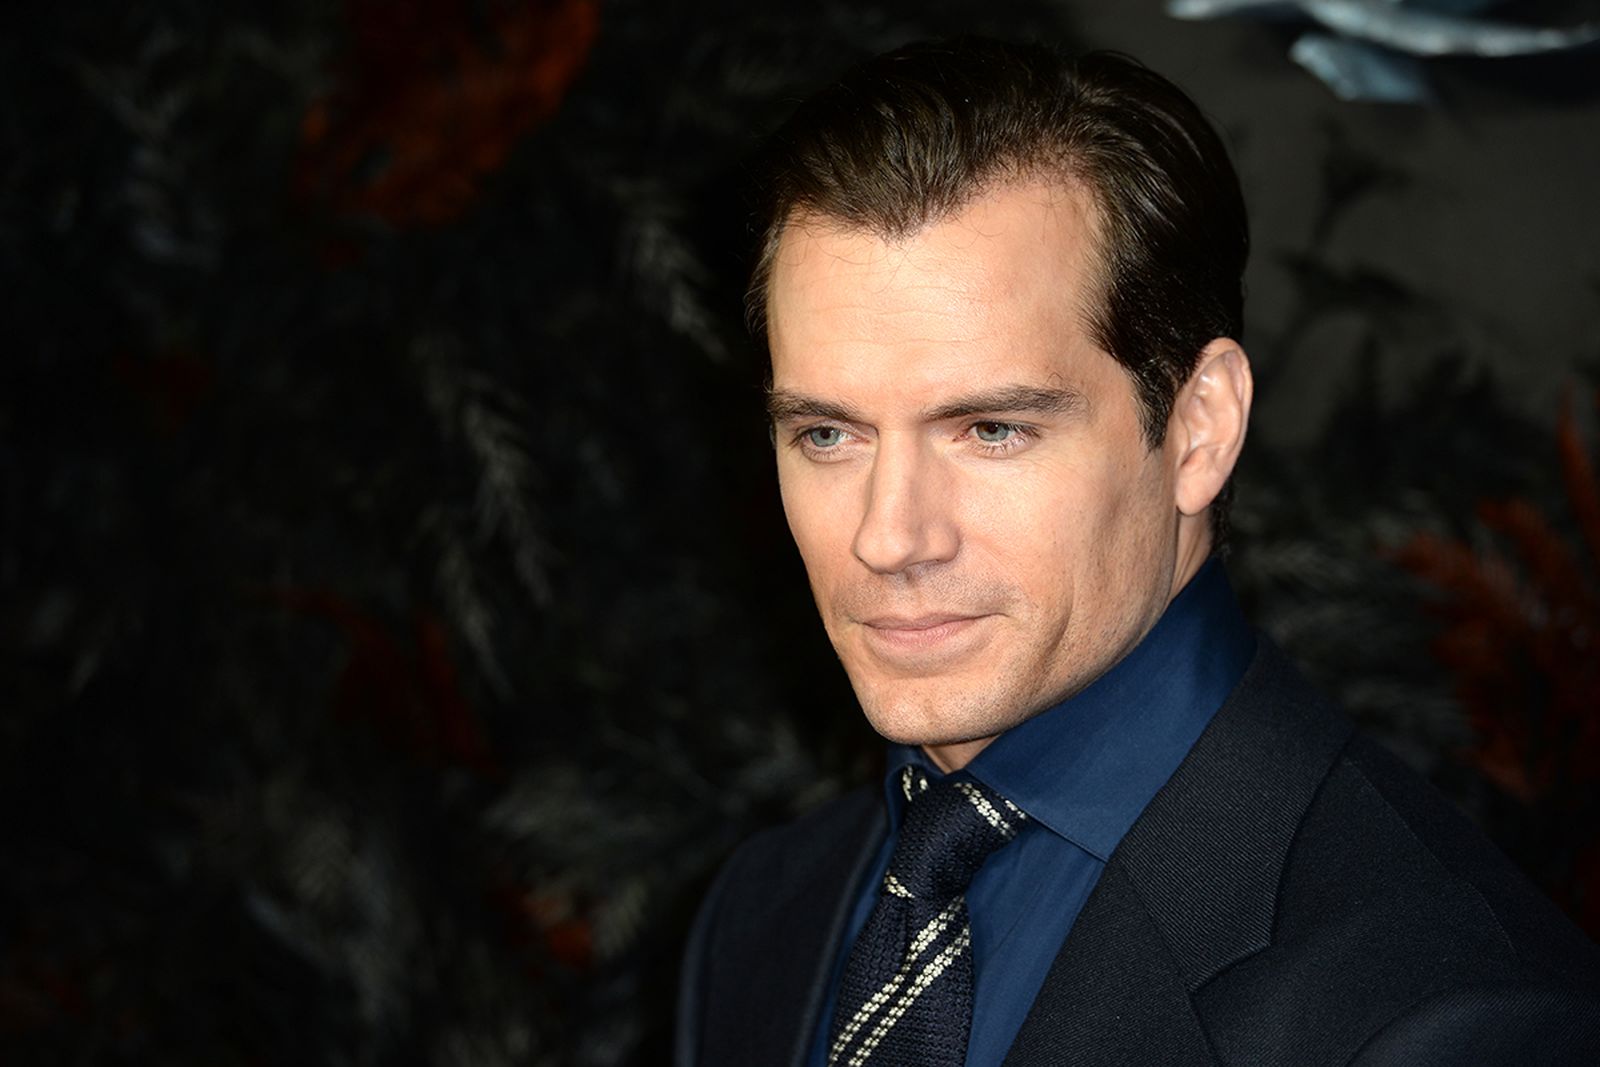 Henry Cavill attends "The Witcher" World Premiere